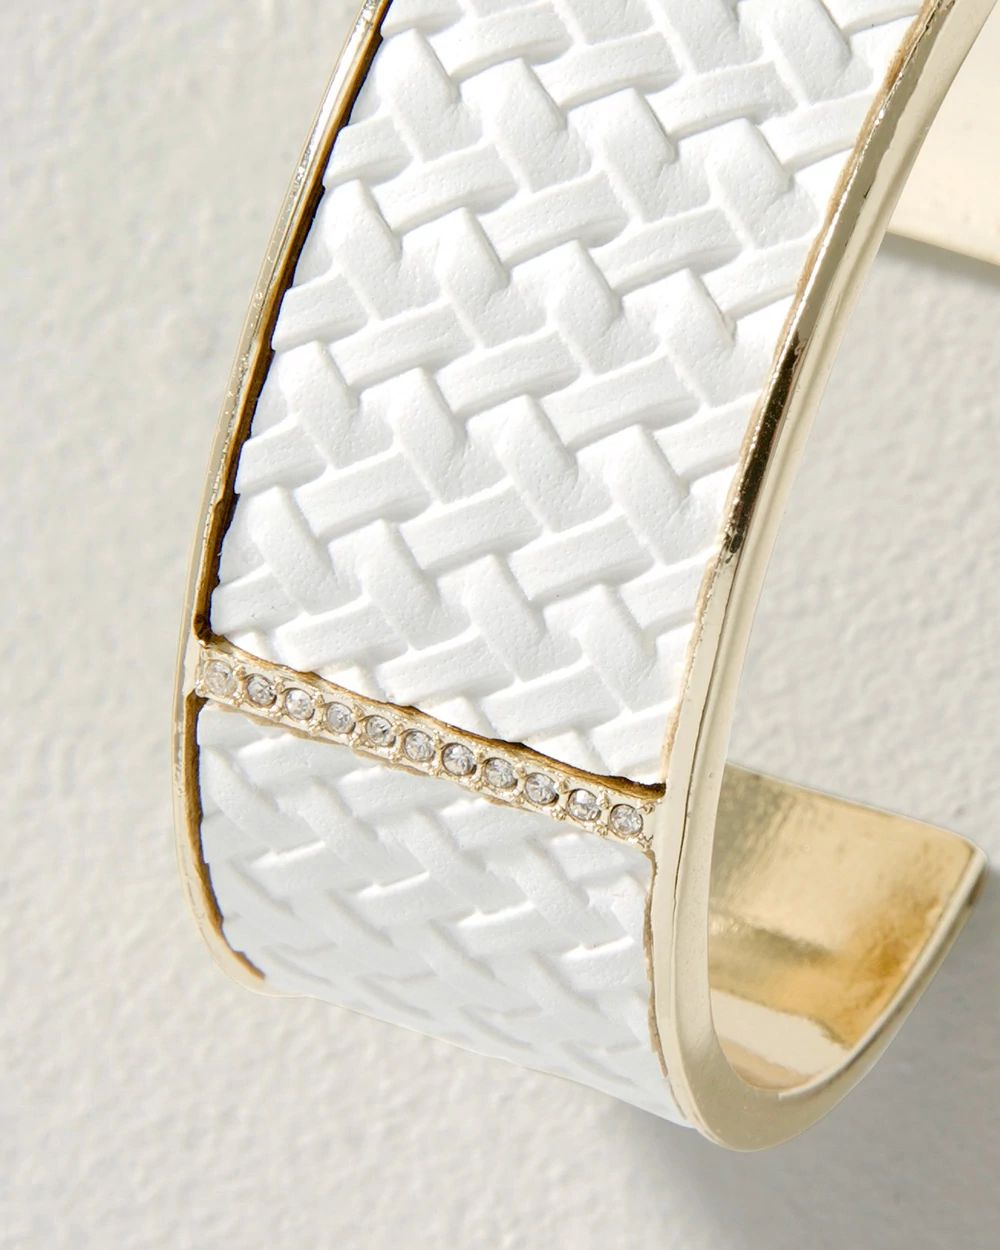 White & Goldtone Leather Cuff click to view larger image.